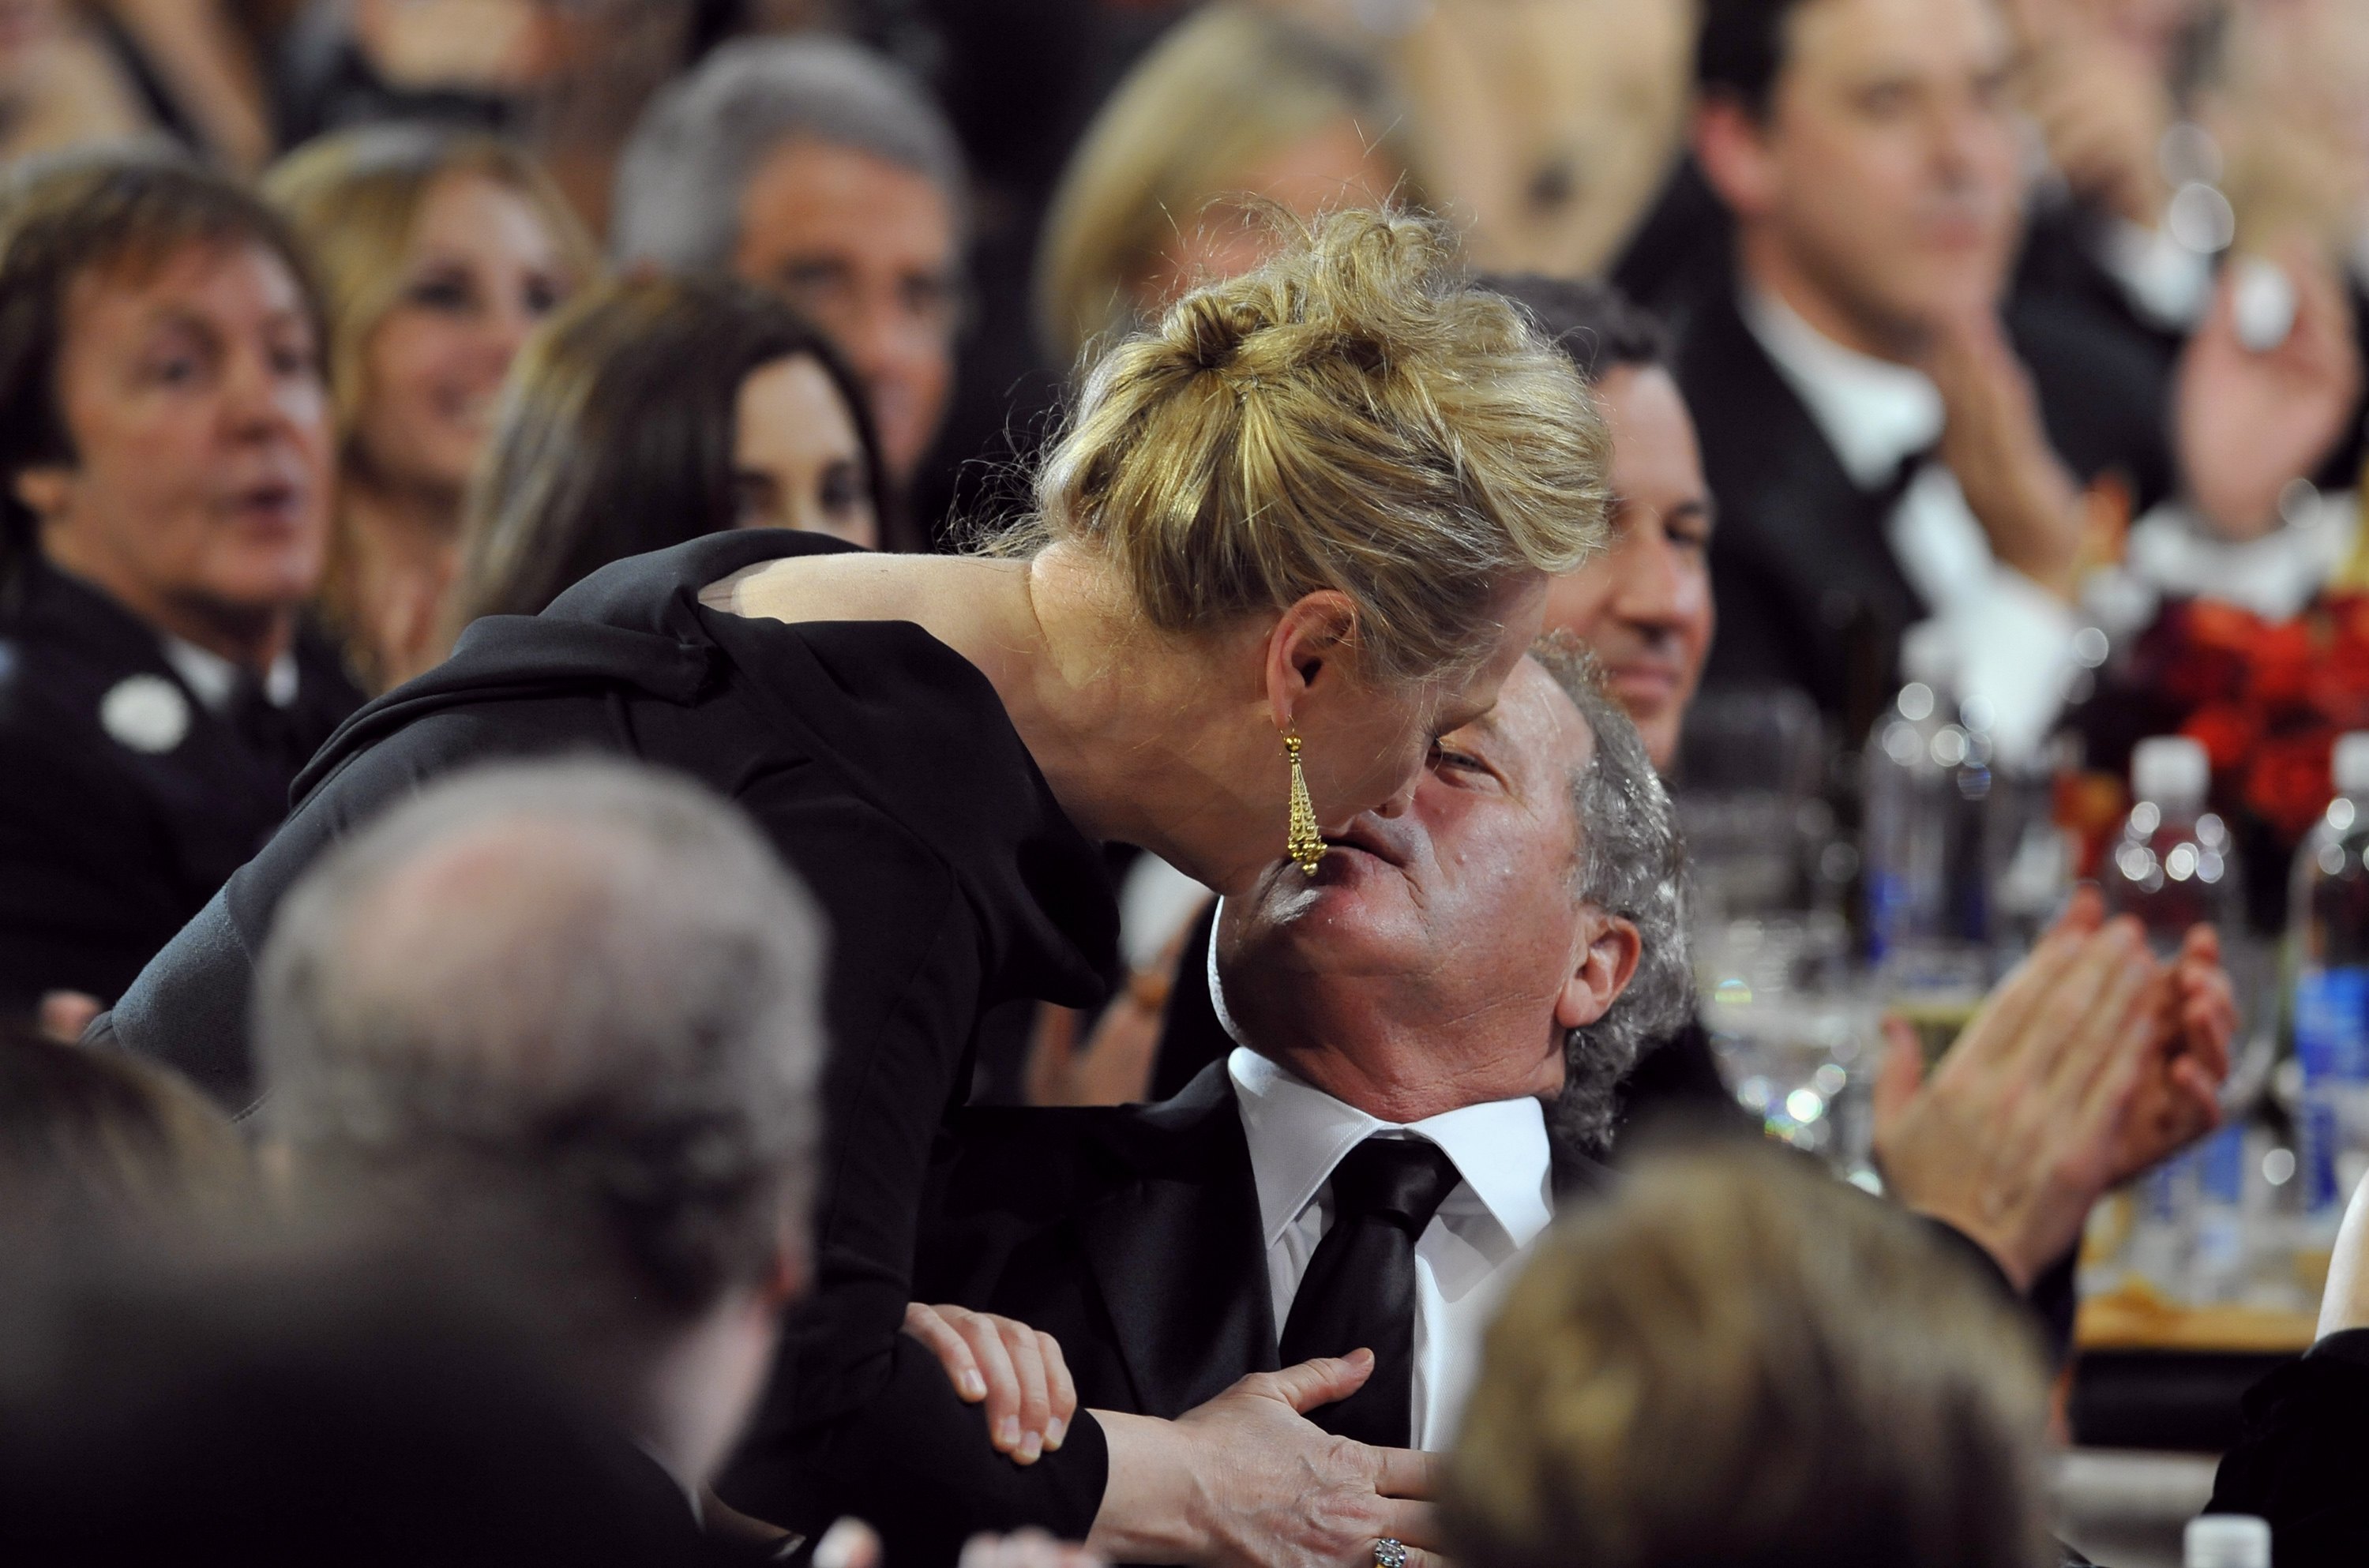 Meryl Streep kisses Don Gummer at the Beverly Hilton Hotel on January 17, 2010 | Source: Getty Images